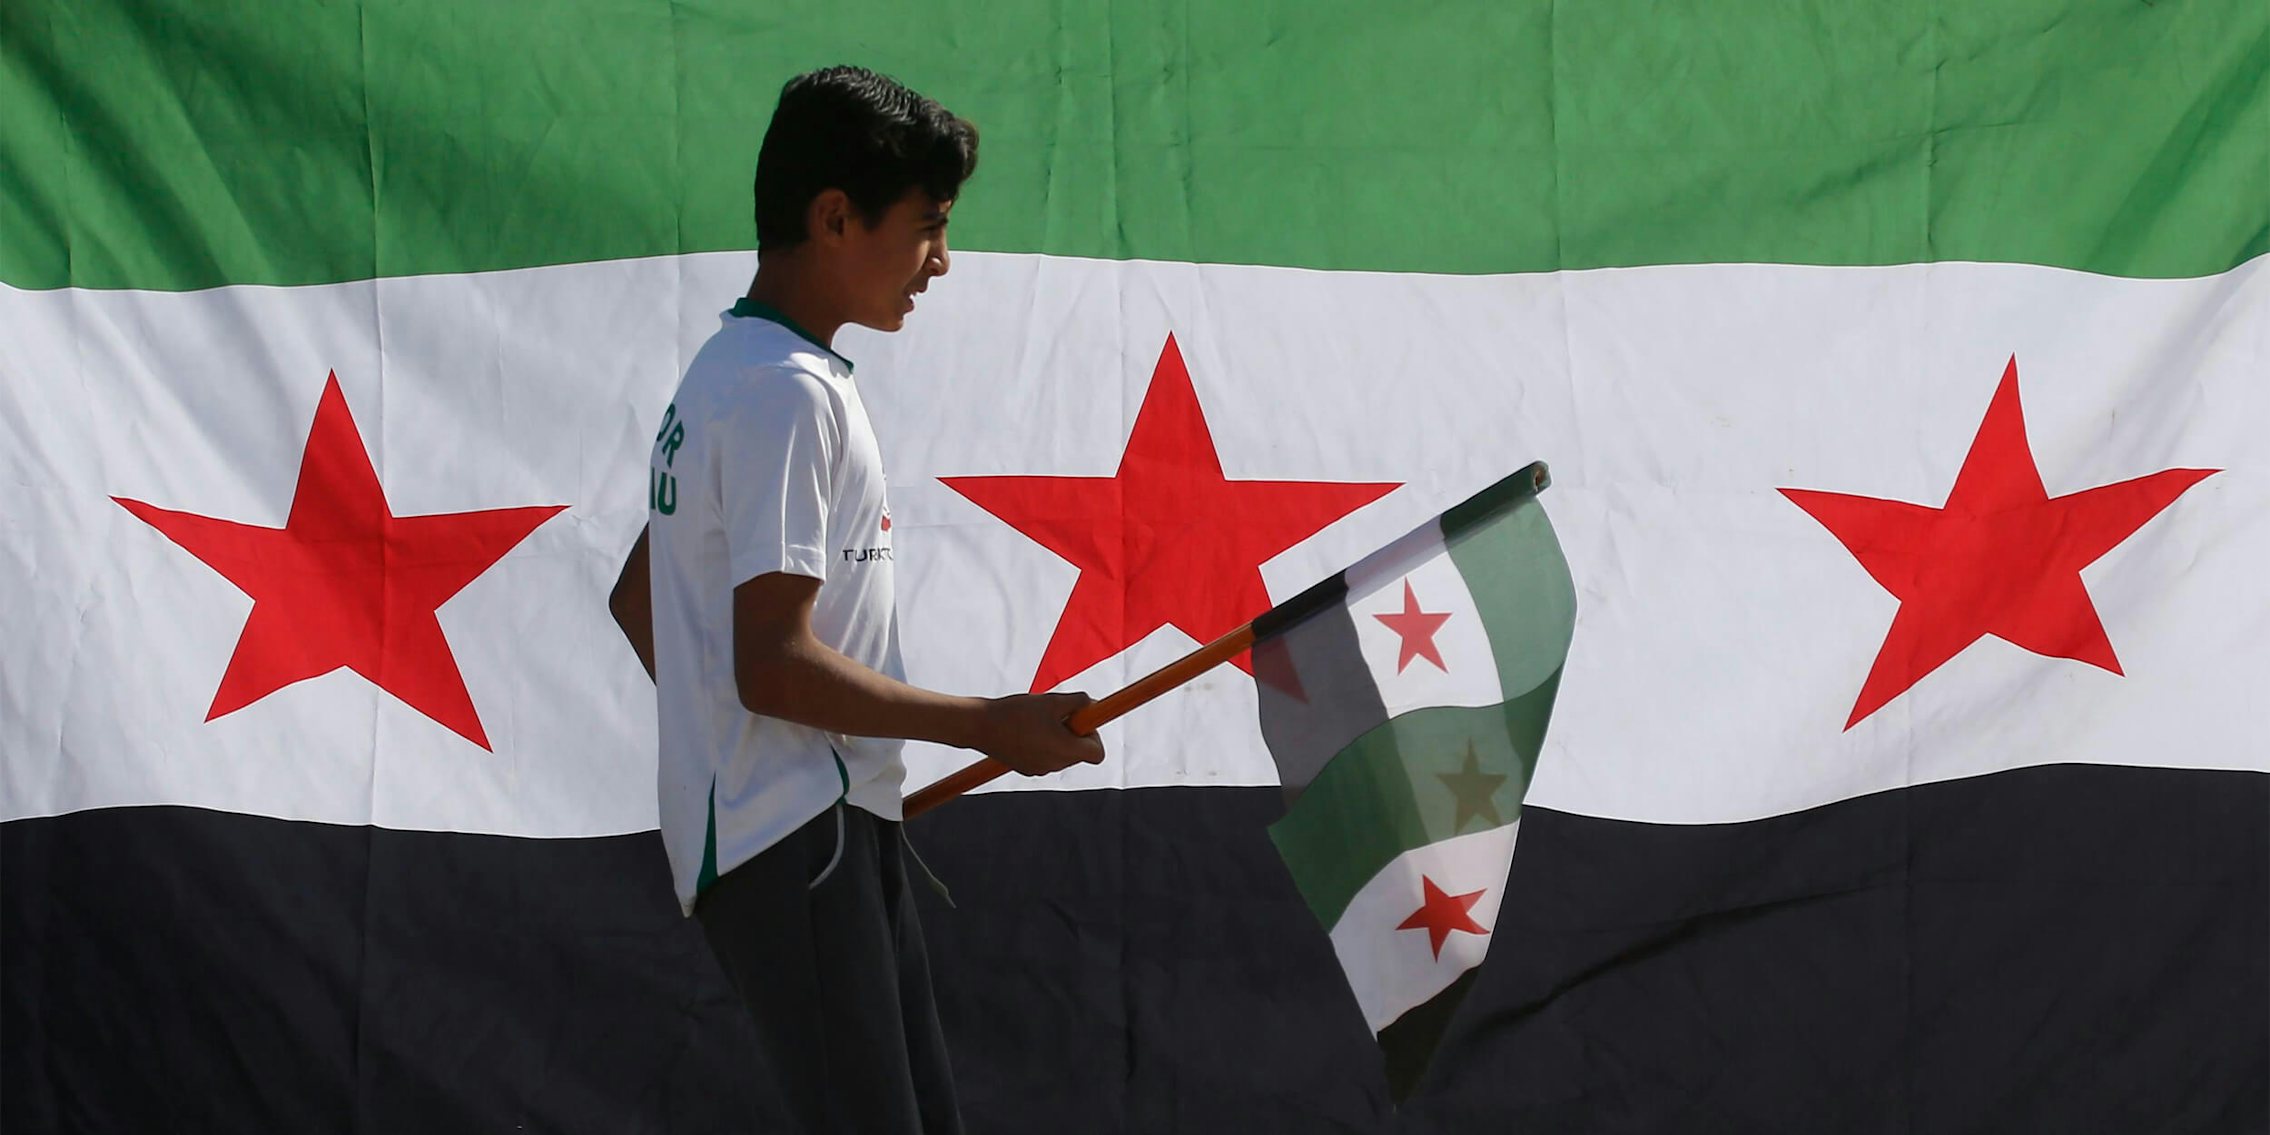 Syrian youth holds revolutionary flag in front of Syrian flag